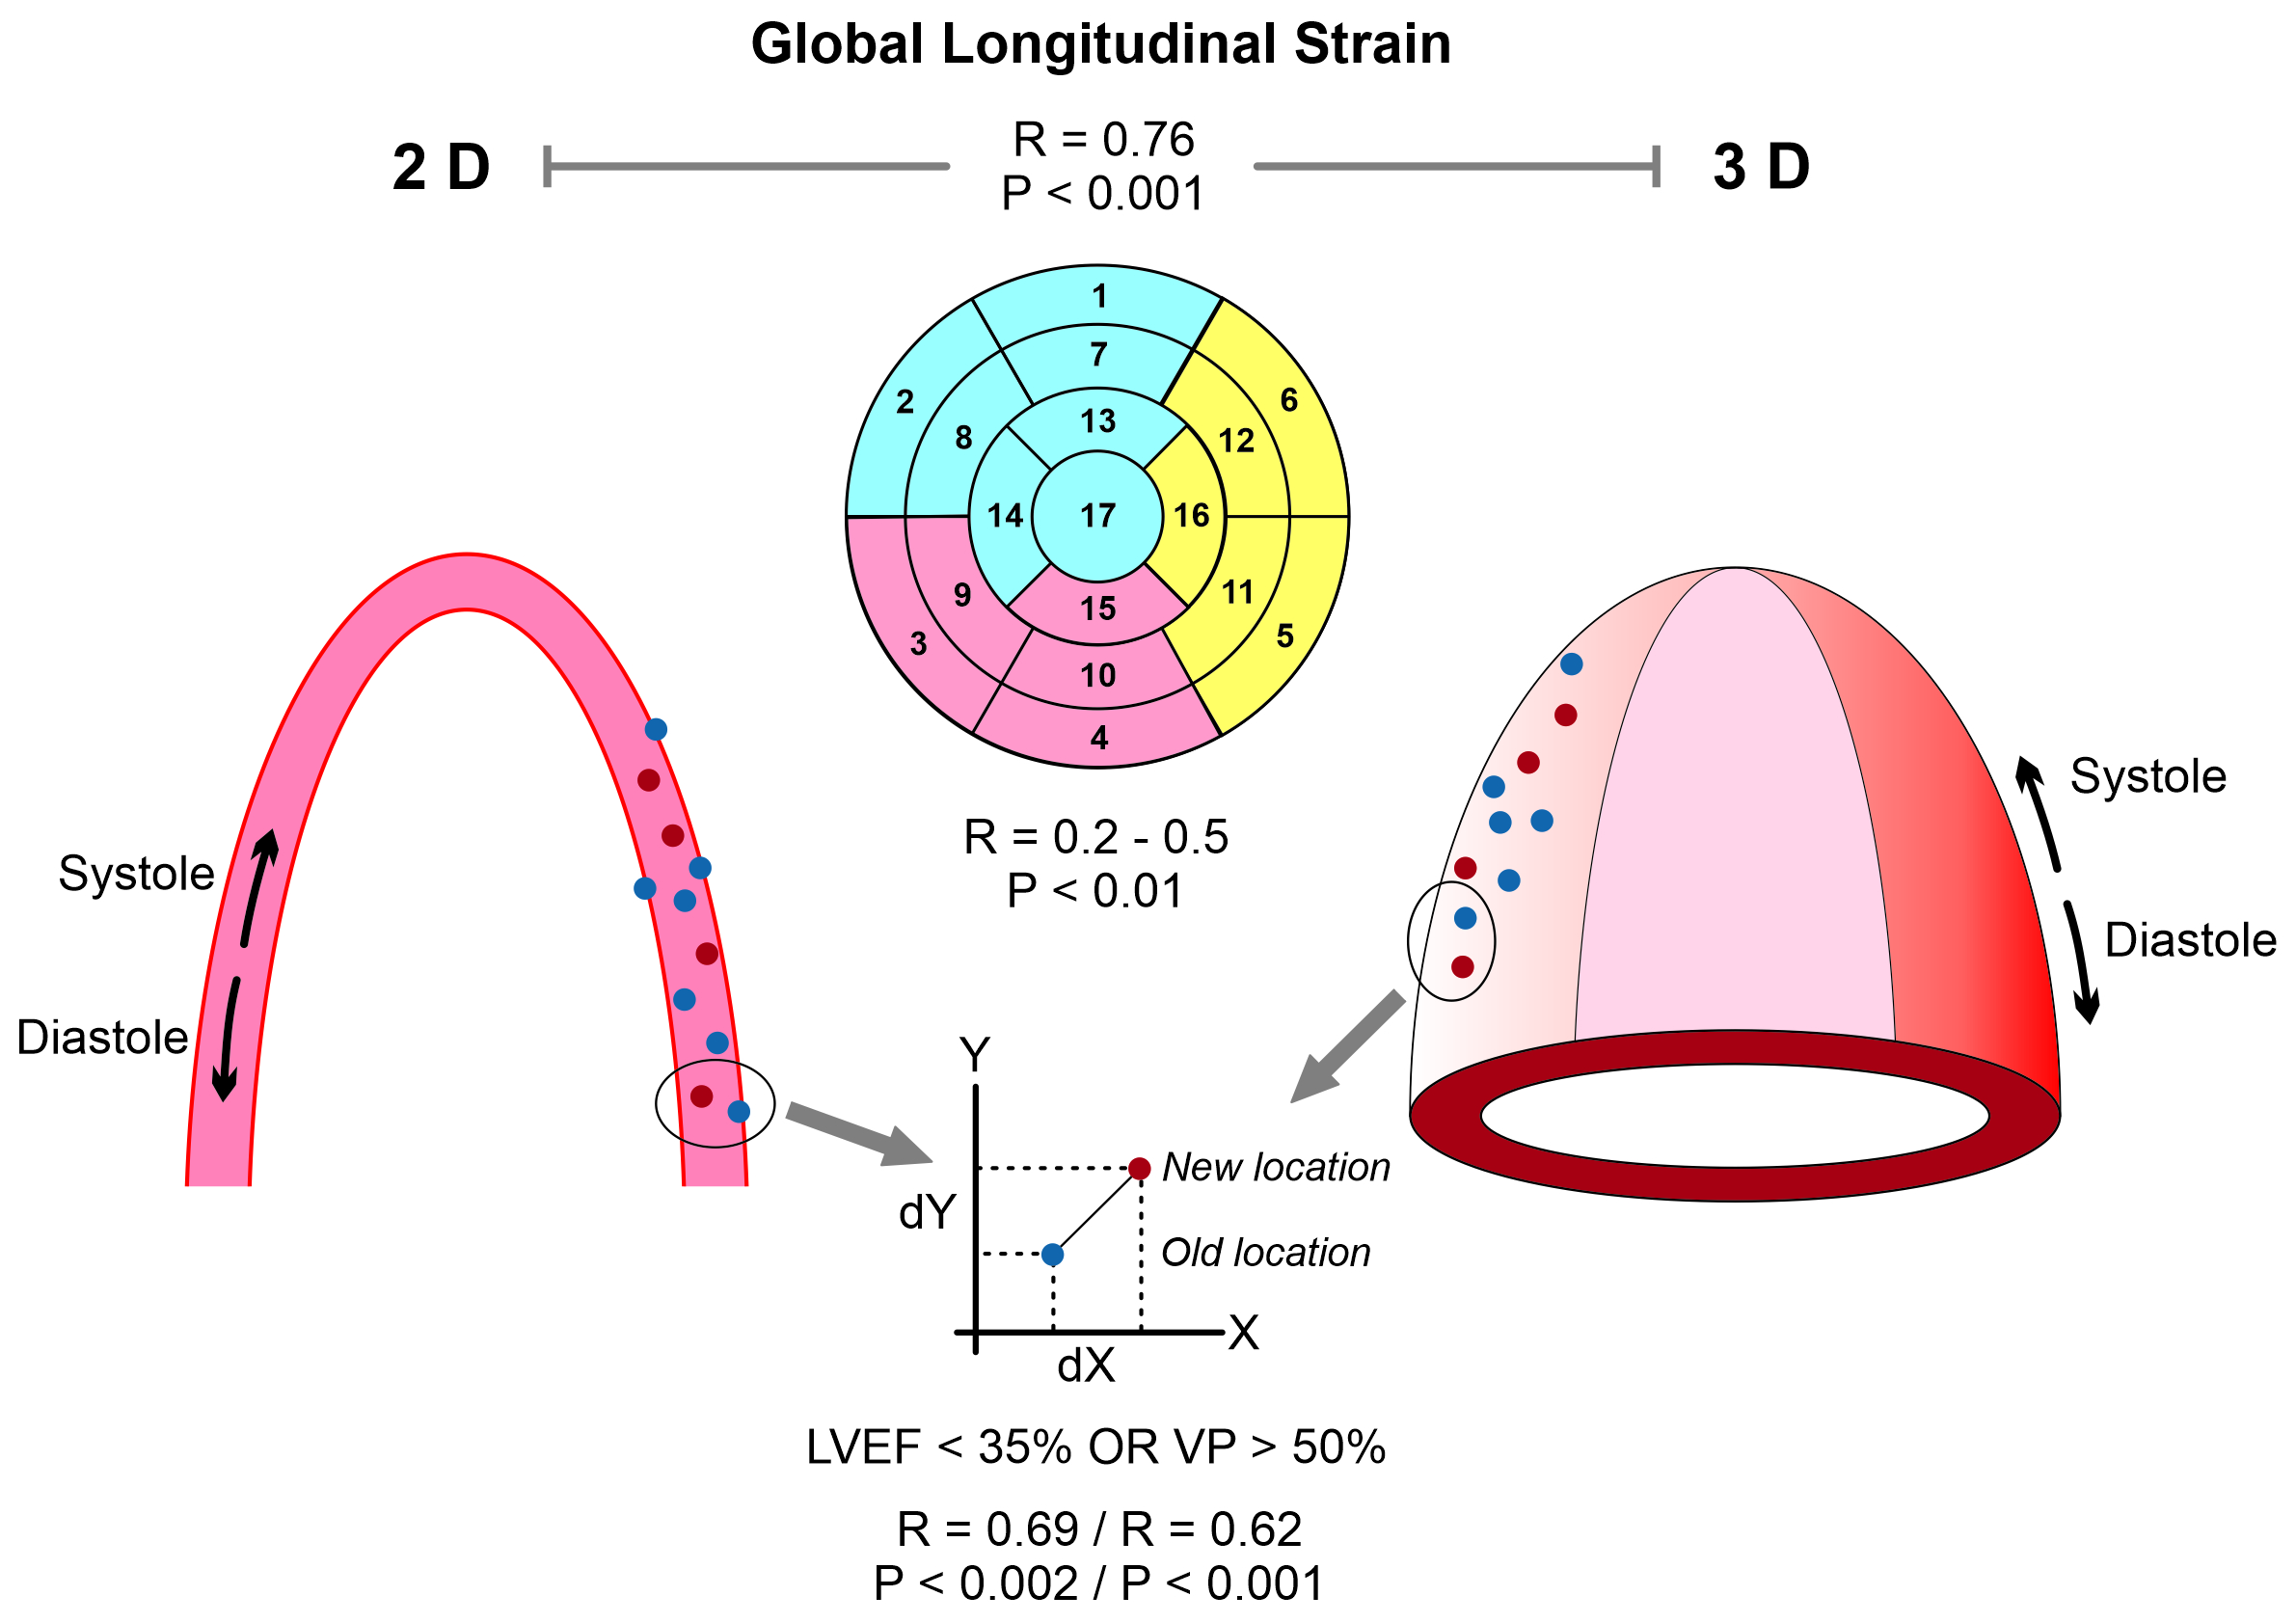 Global Longitudinal Strain and Cardiac Events in Patients With